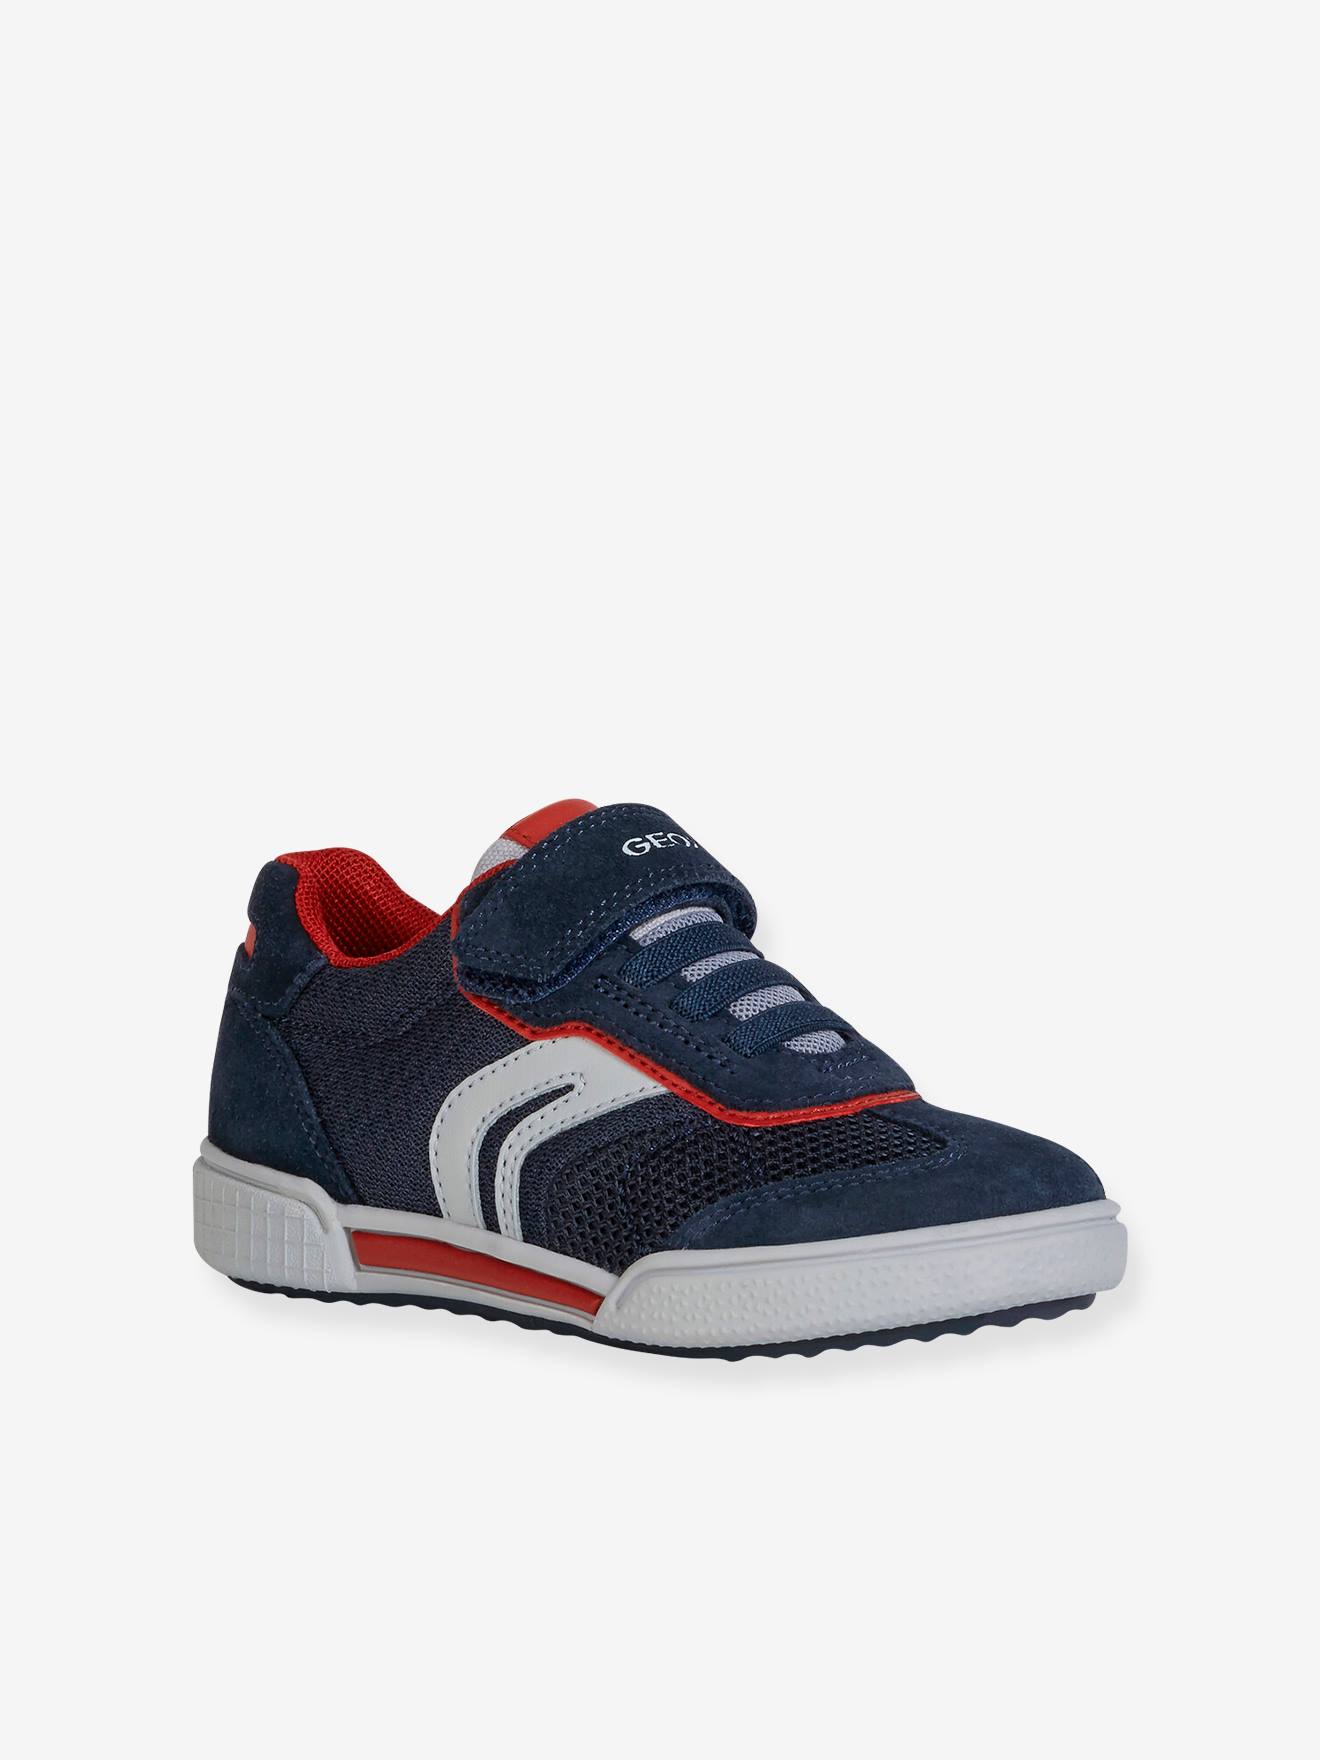 Trainers for Boys, Poseido by GEOX 